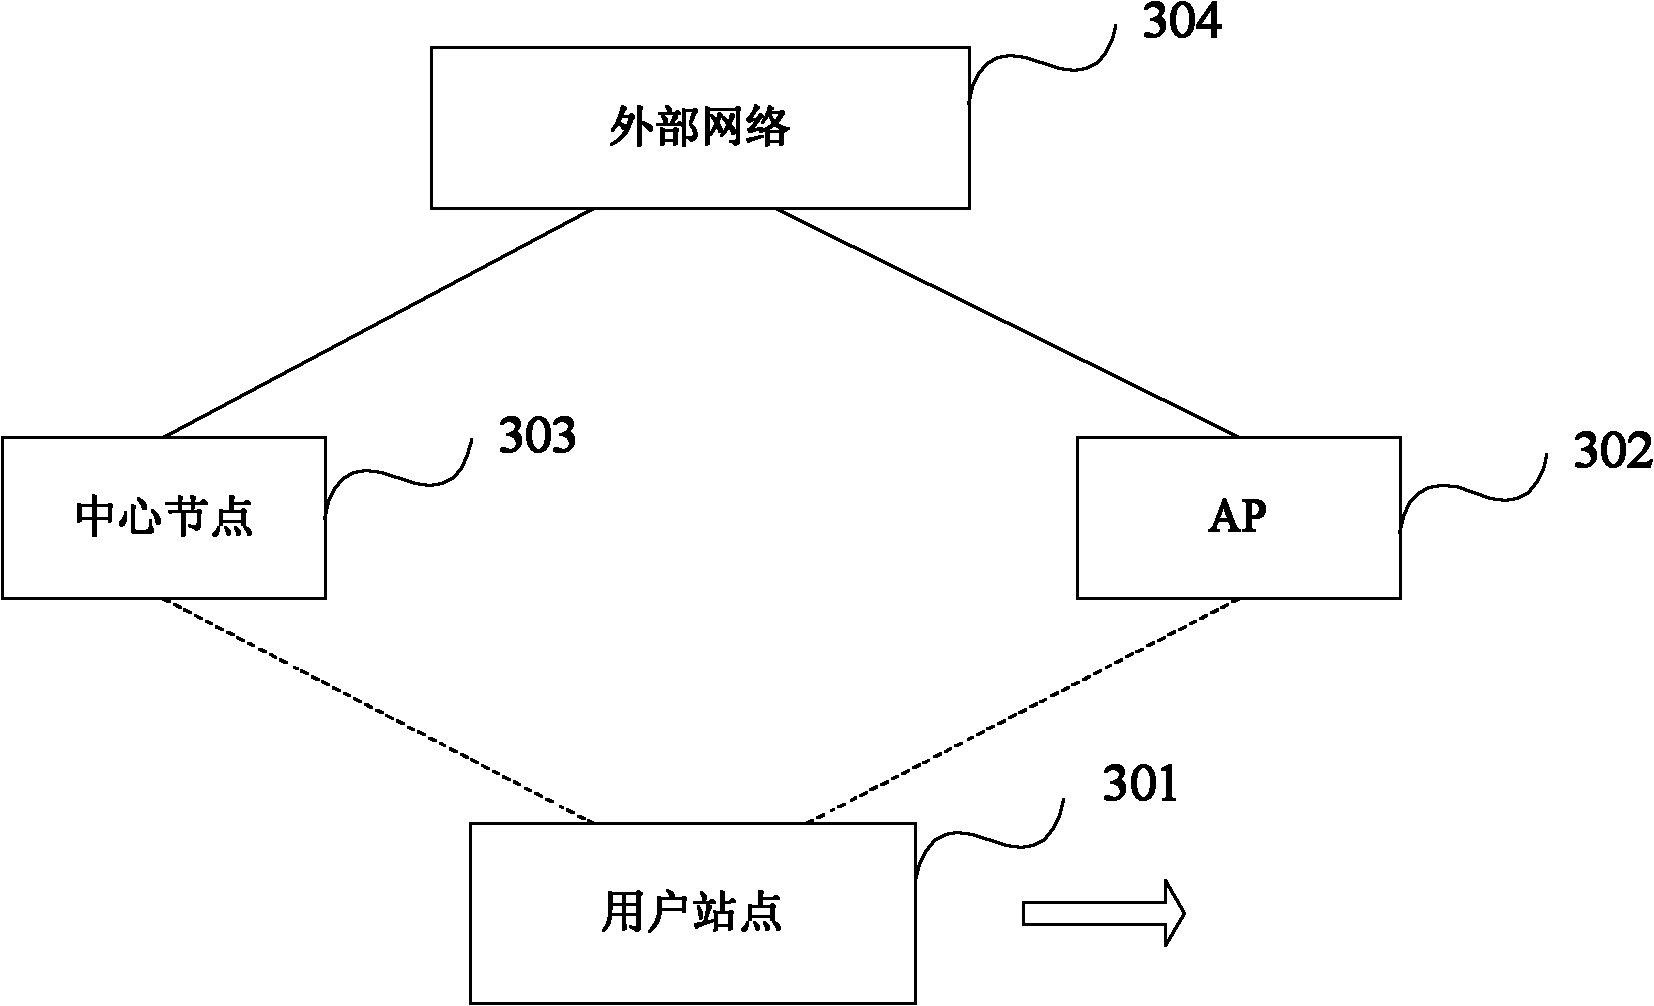 Method for accessing a wireless local area network and communication system